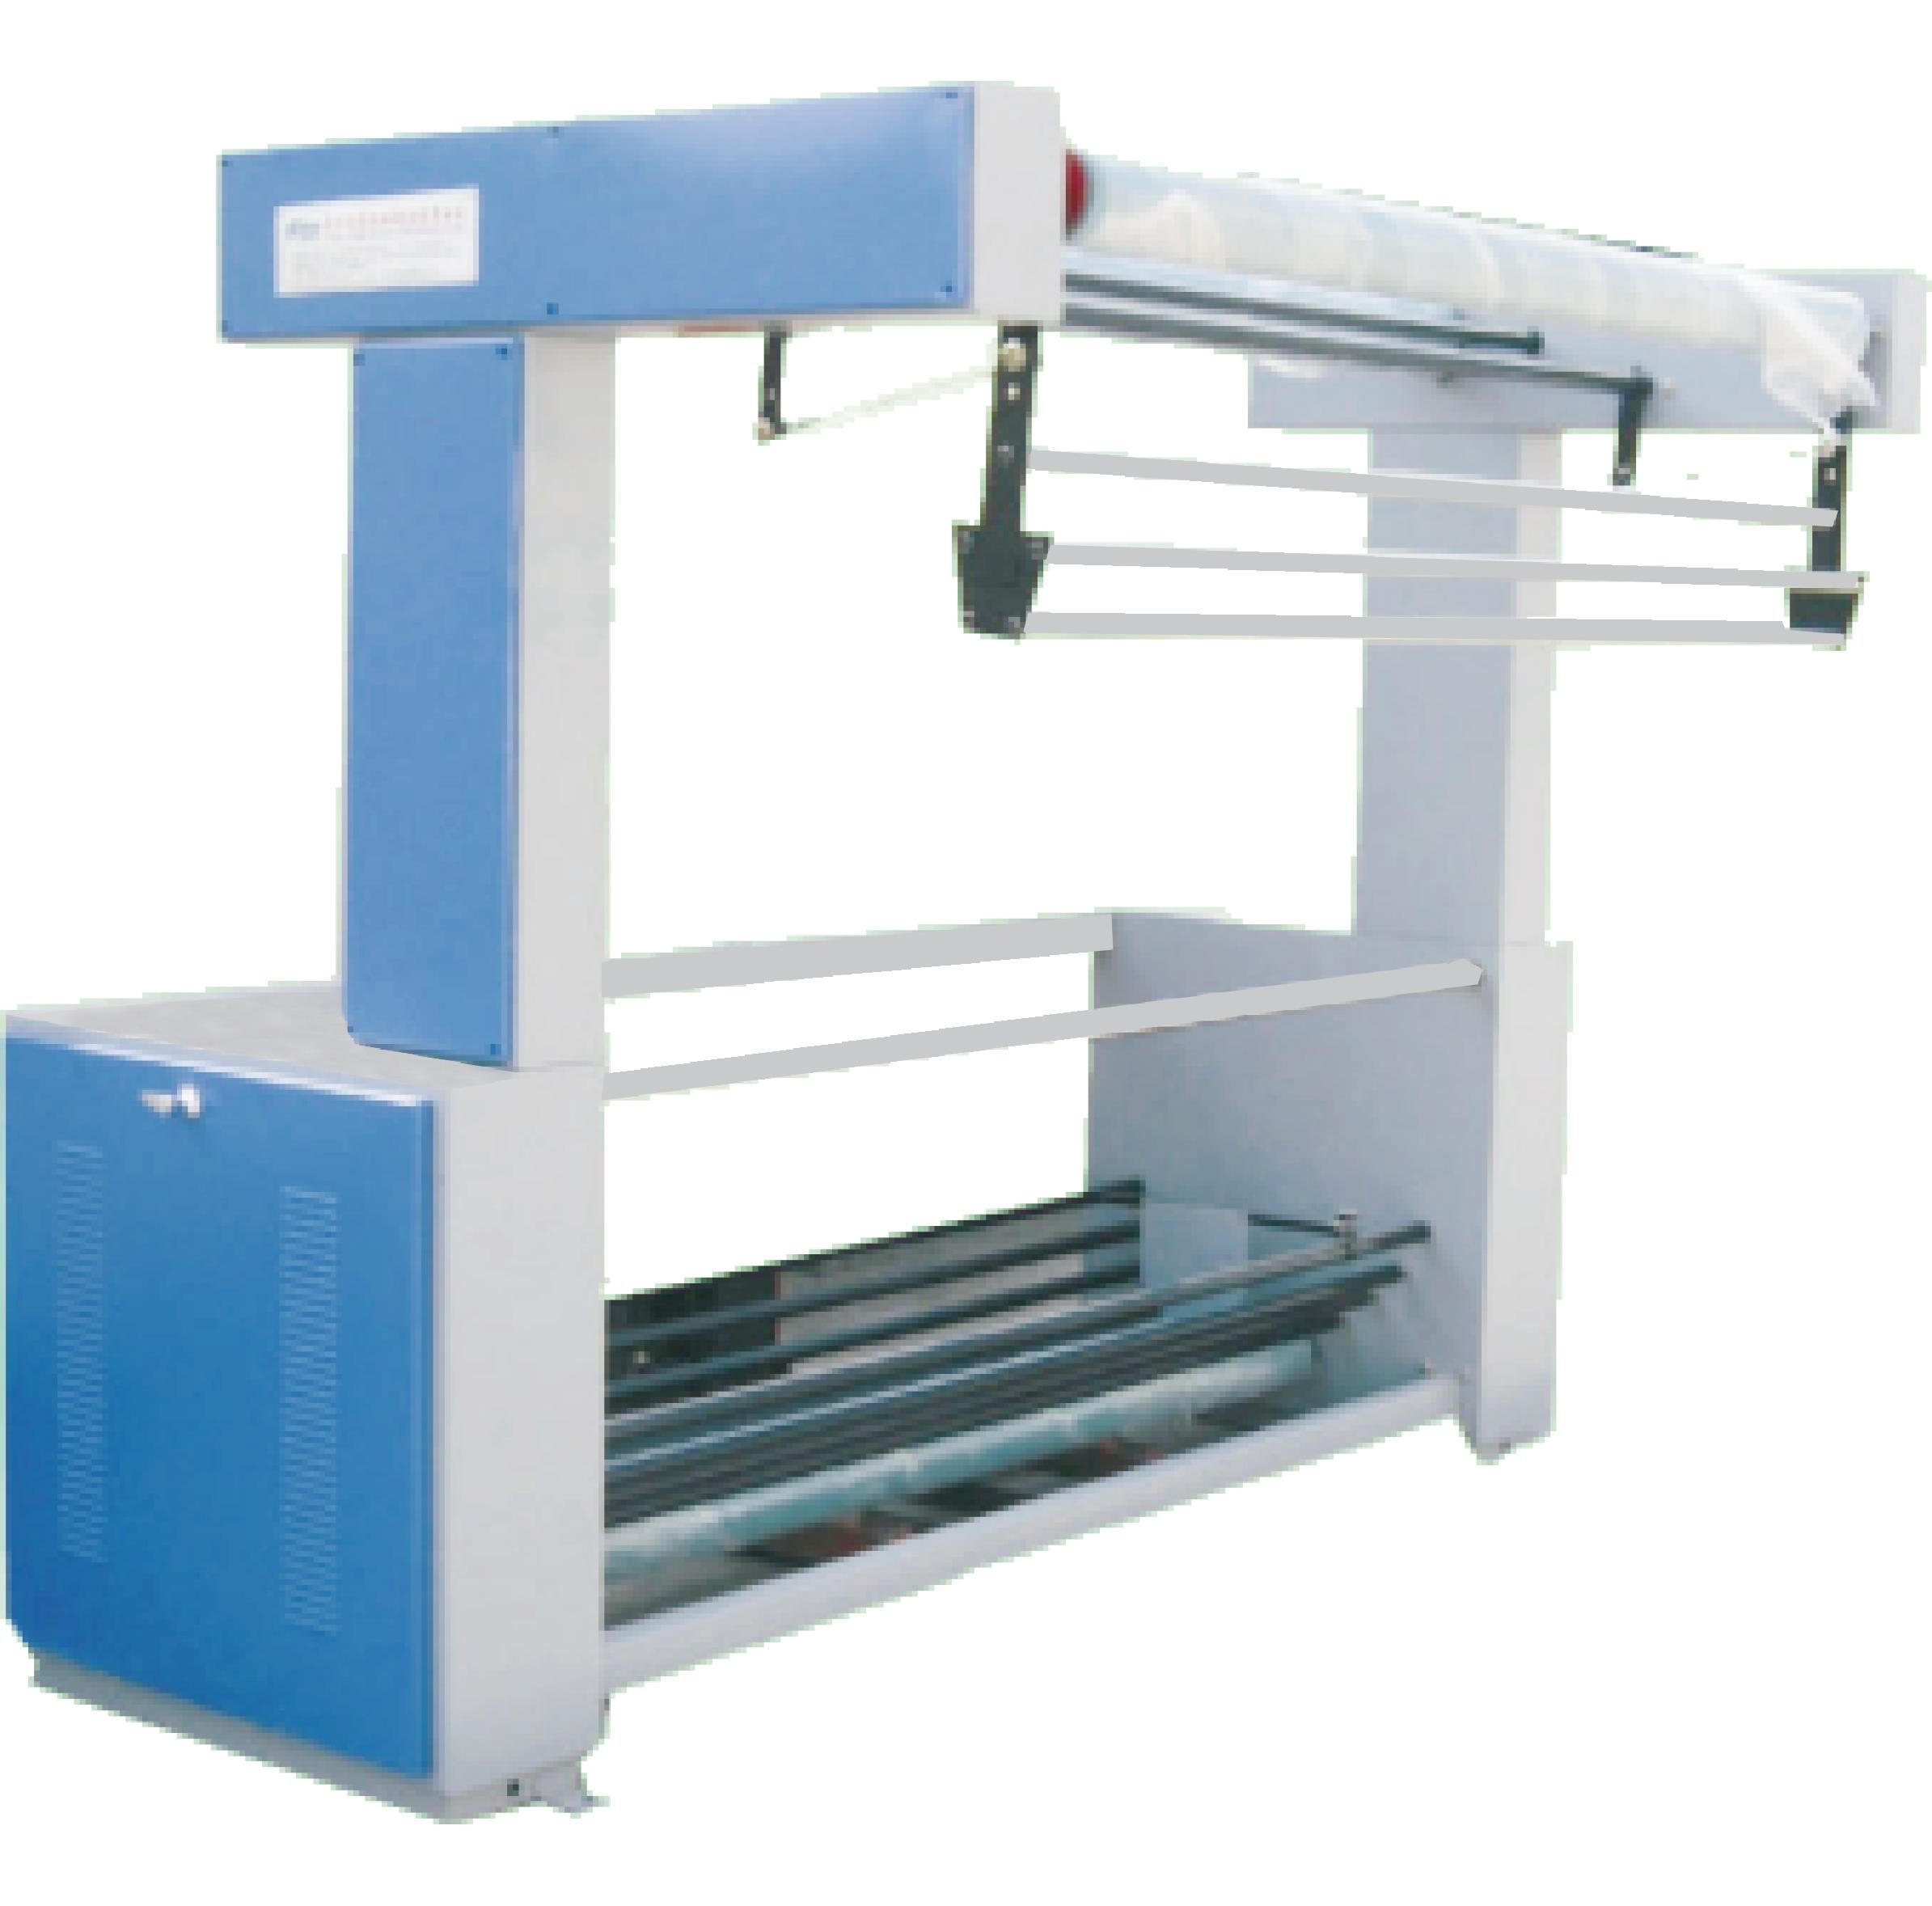  Frequency Conversion Control Fabric Relaxing Machine Tension Free Unwinding Machine Manufactures